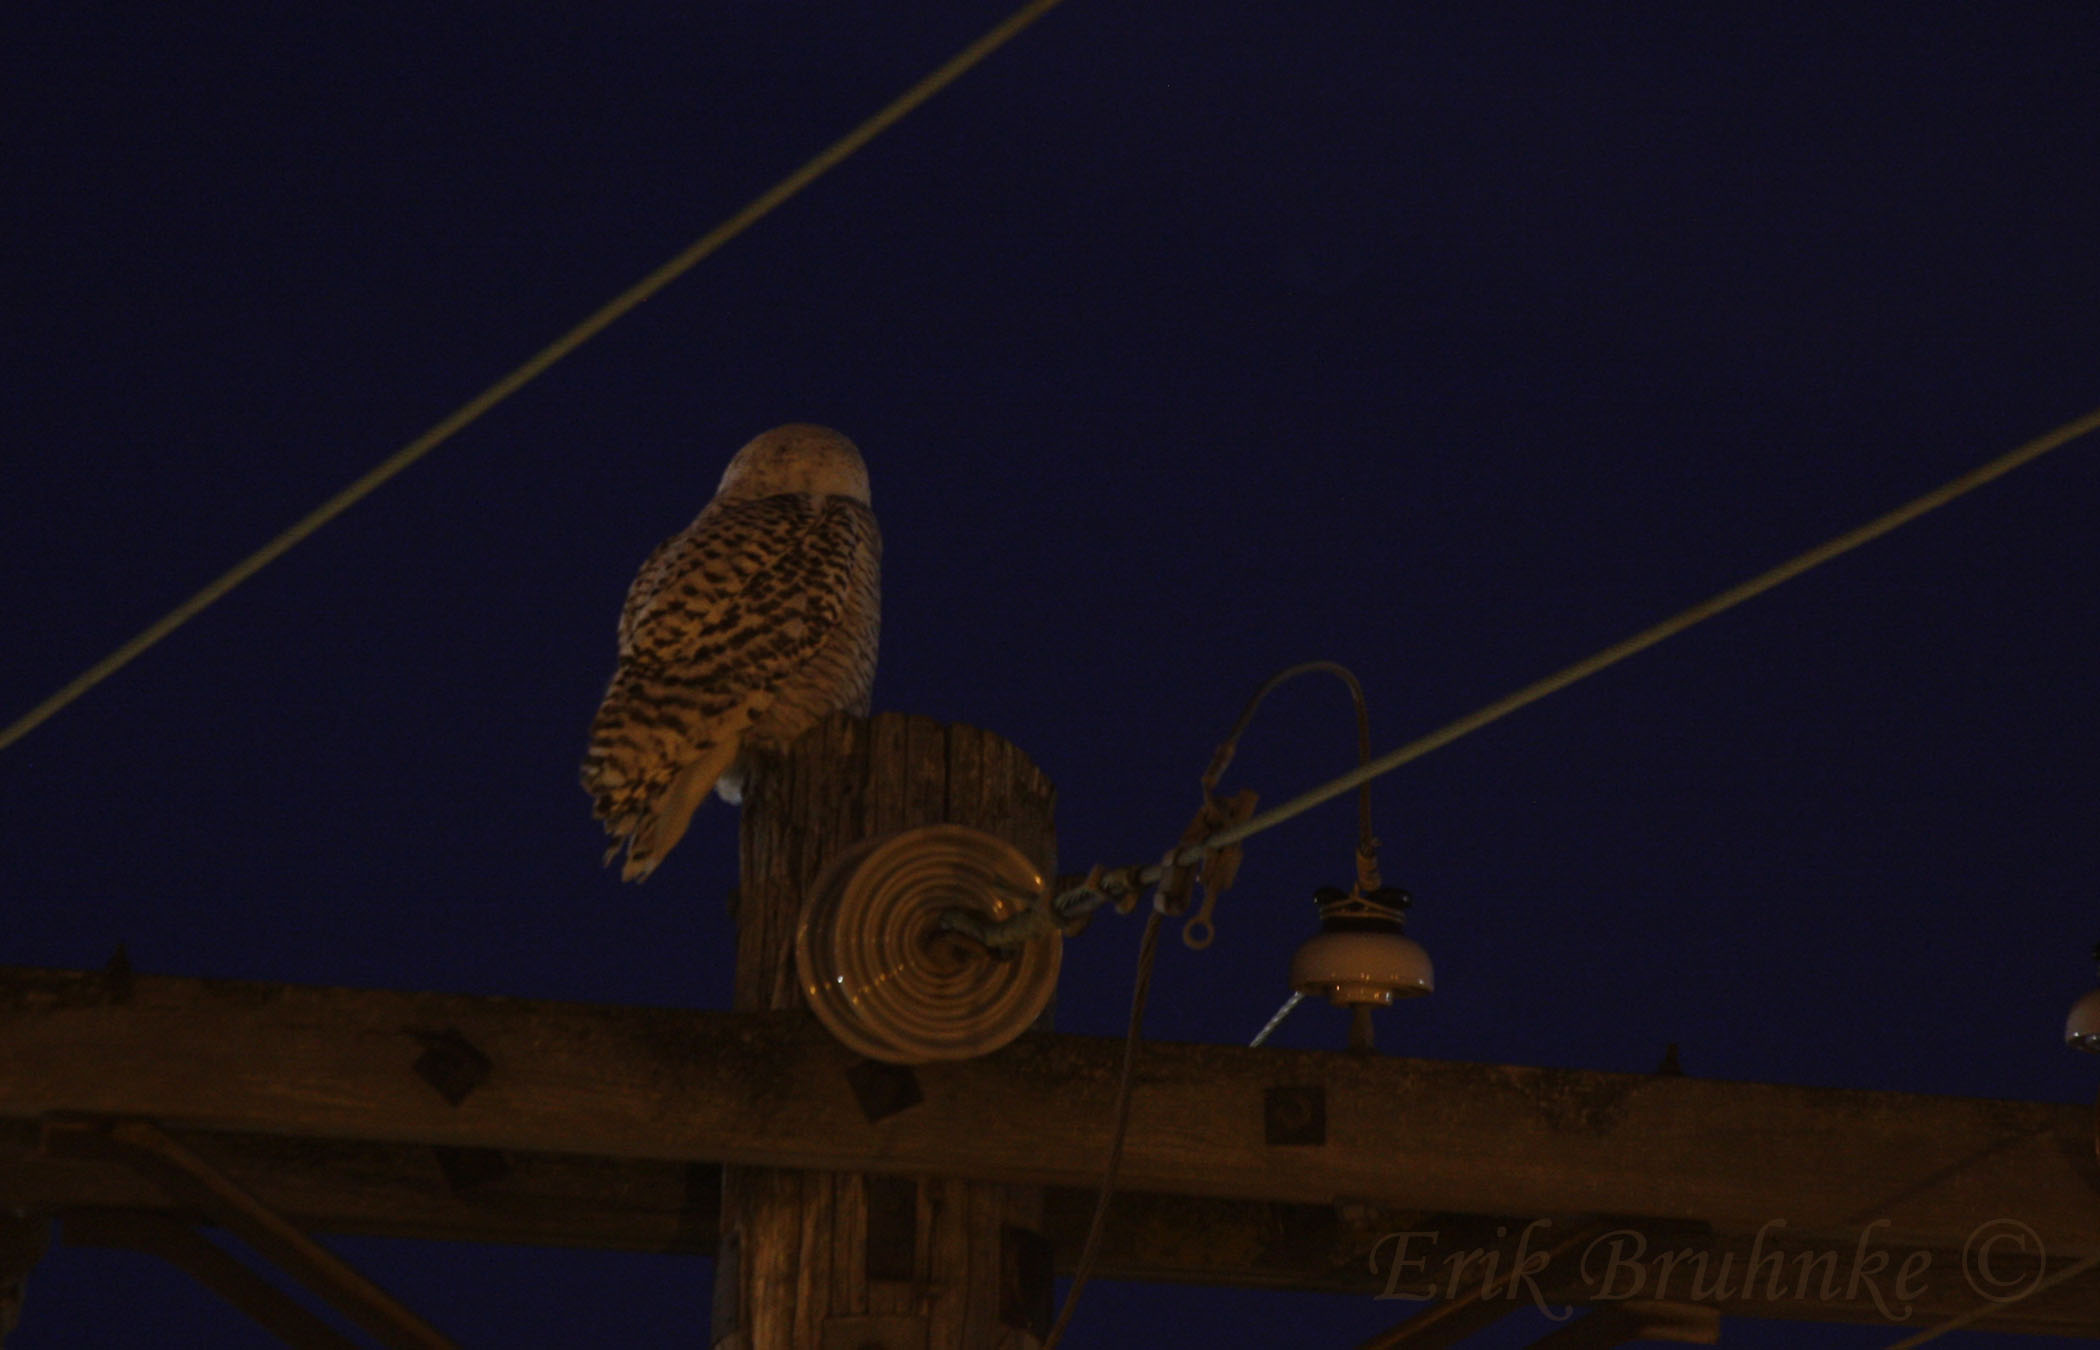 Snowy Owl. Four-second shutter exposuer. No flash was used